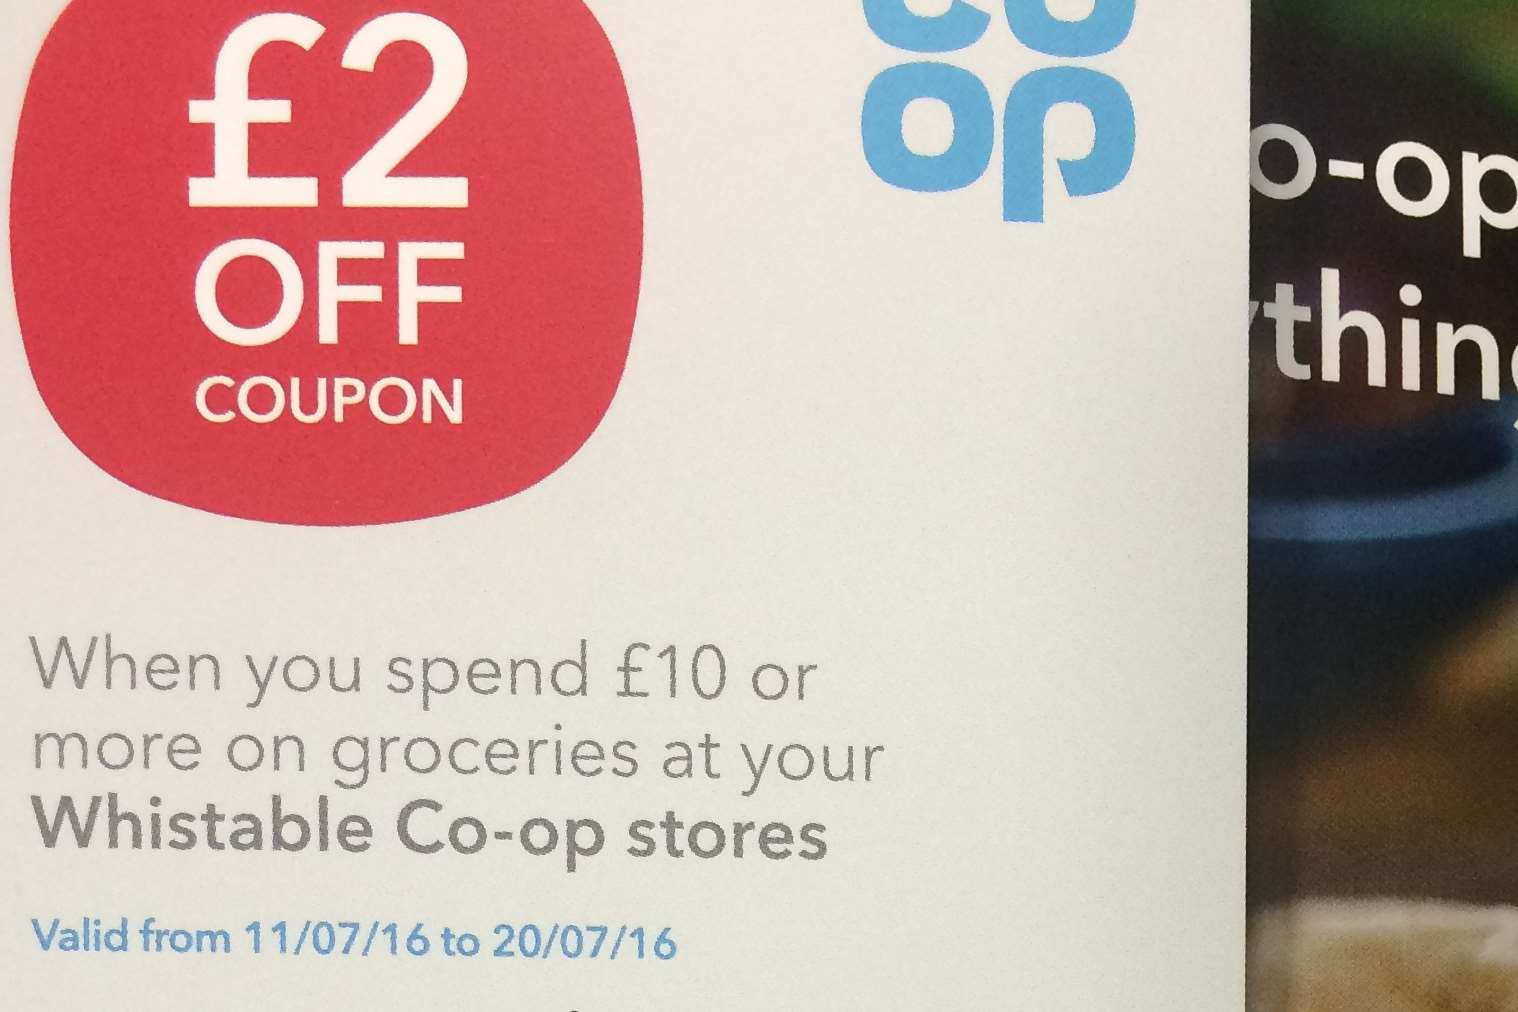 It includes coupons when spending £10 or more on groceries in “Whistable” Co-op stores